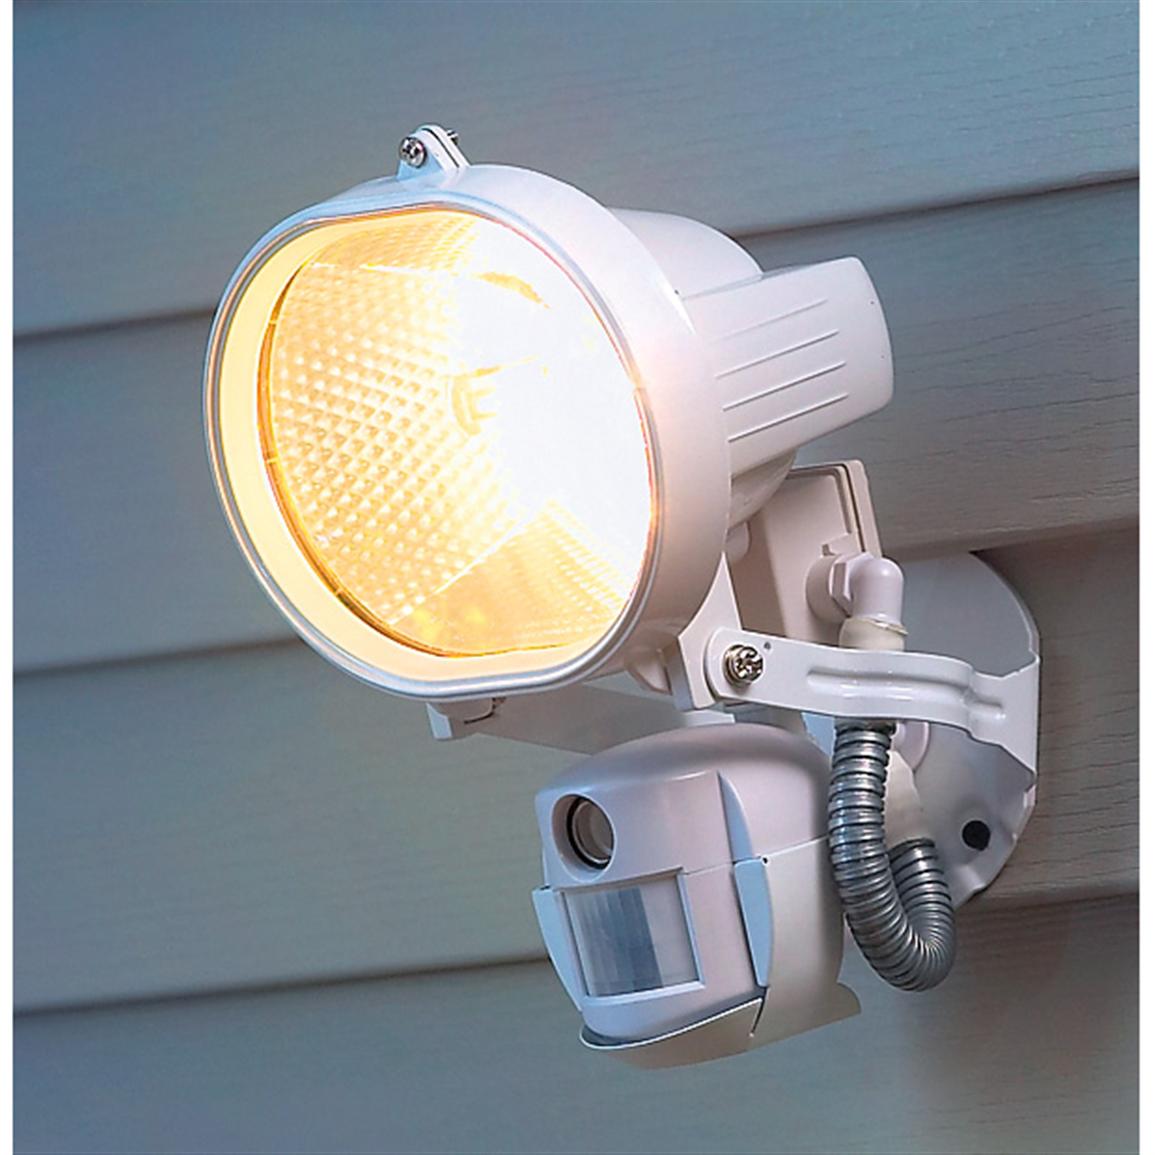 lights home security reviews